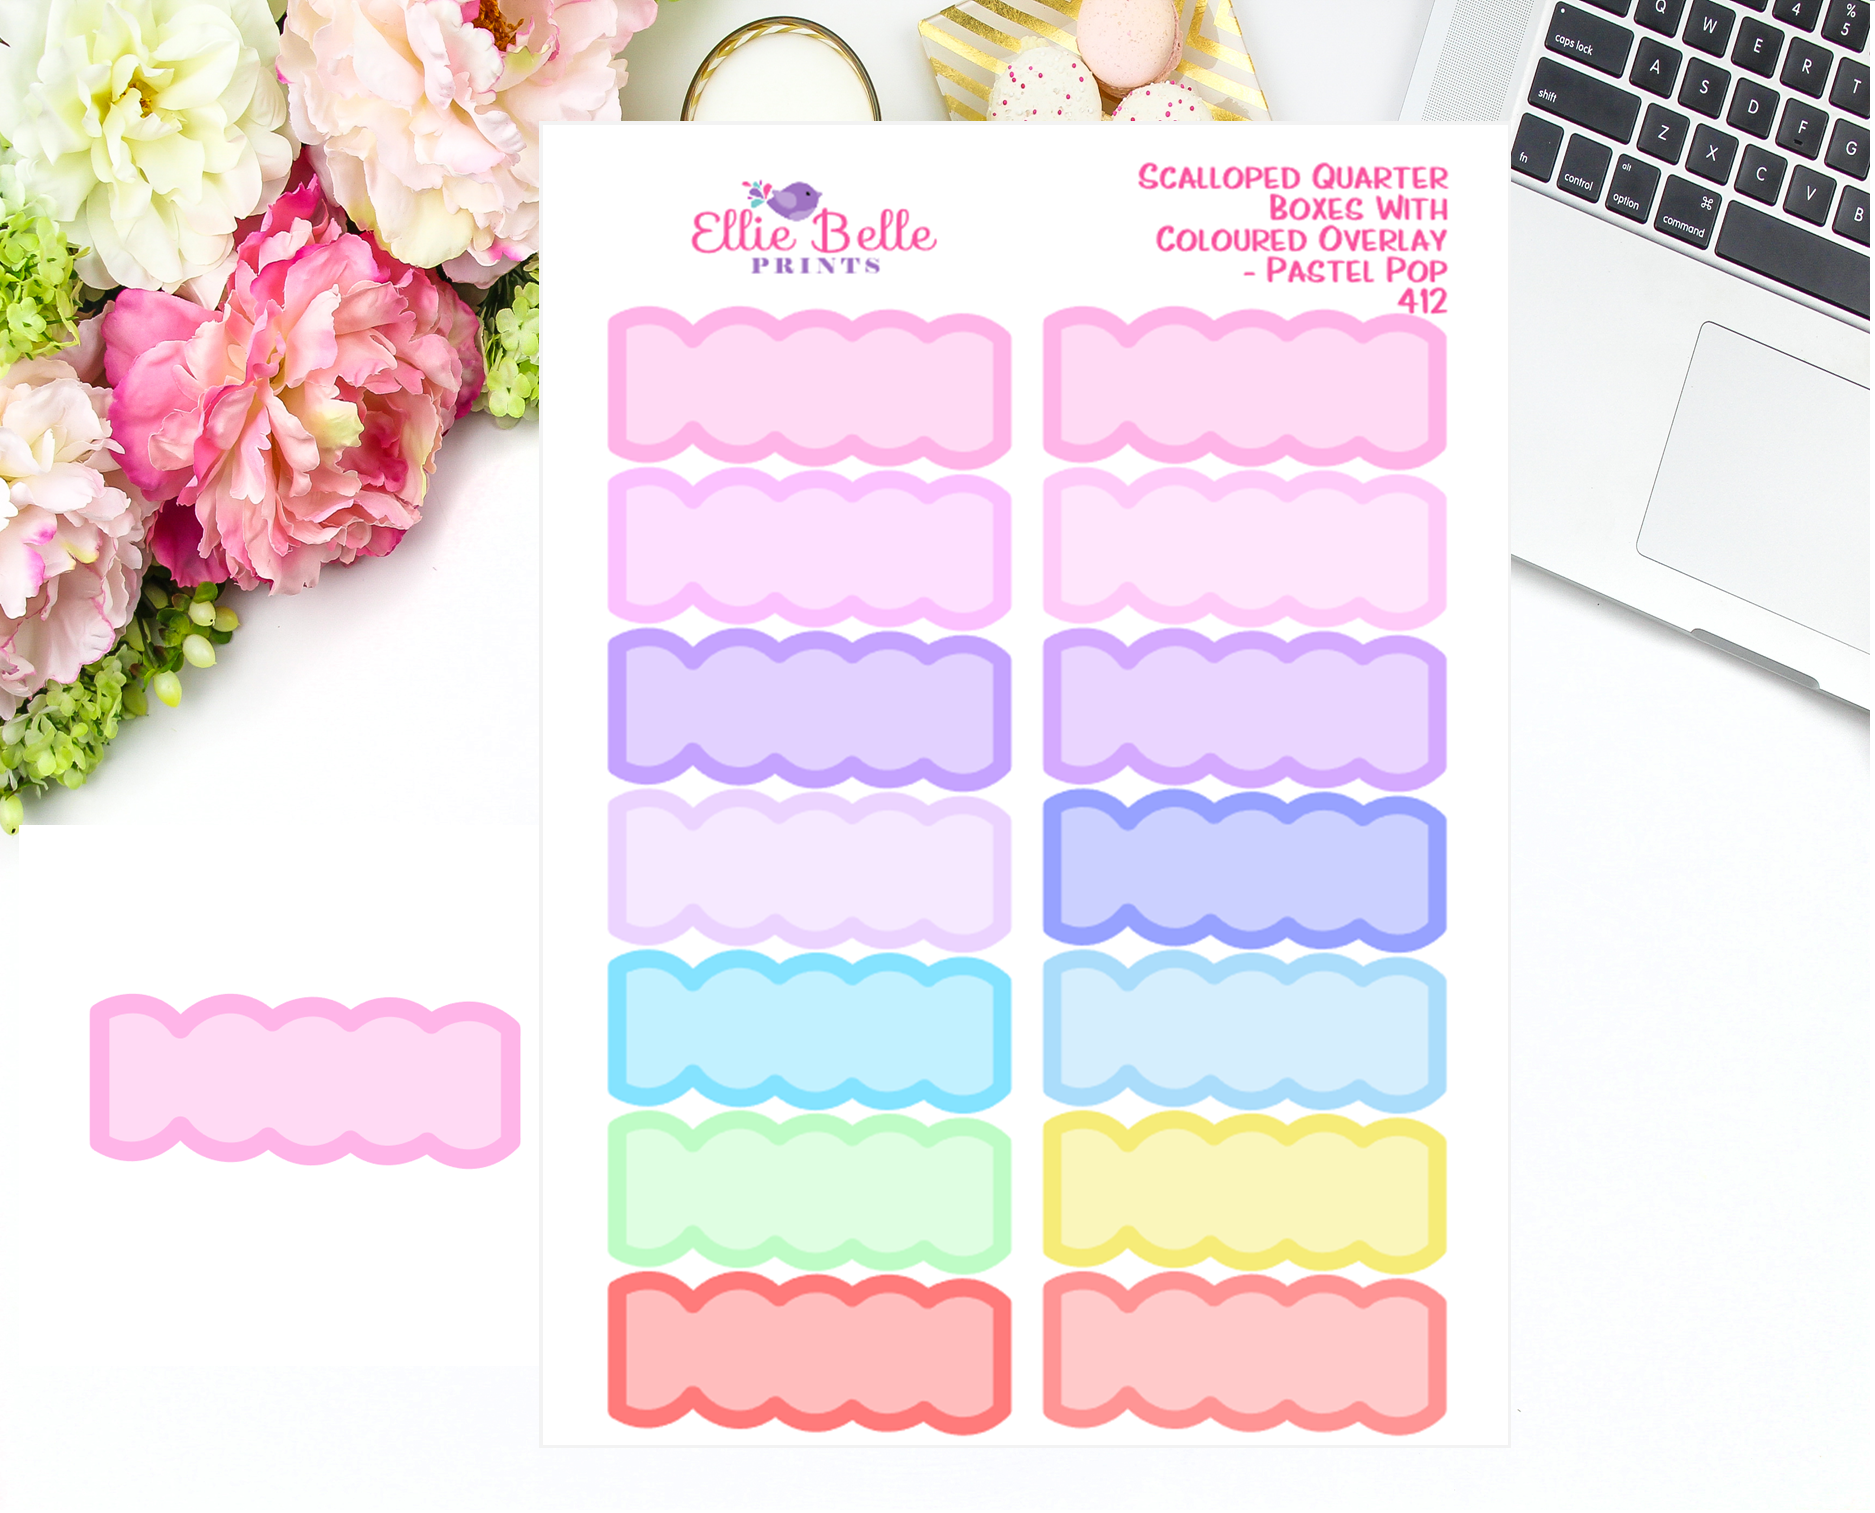 Scalloped Quarter Box With Coloured Overlay Stickers - Pastel Pop